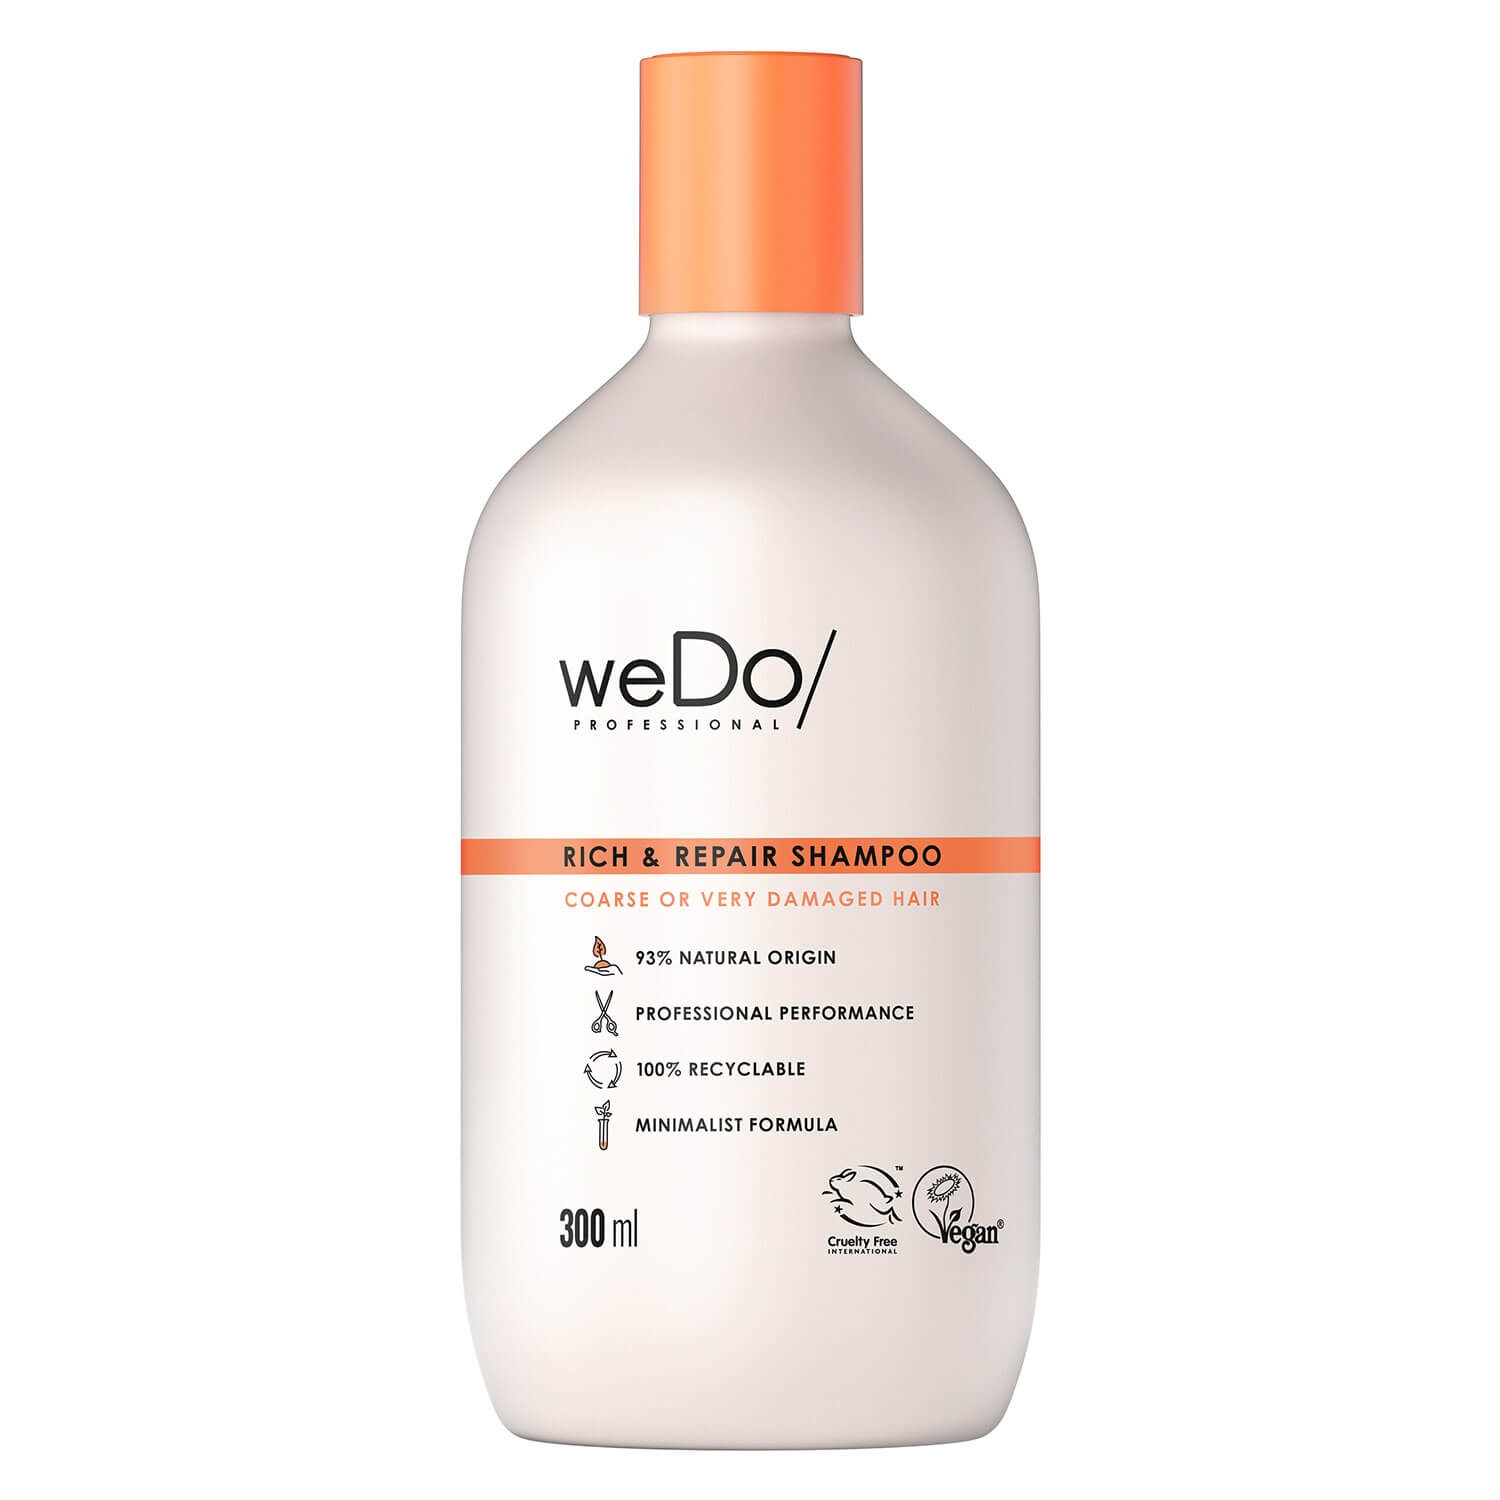 Product image from weDo/ - Rich & Repair Shampoo